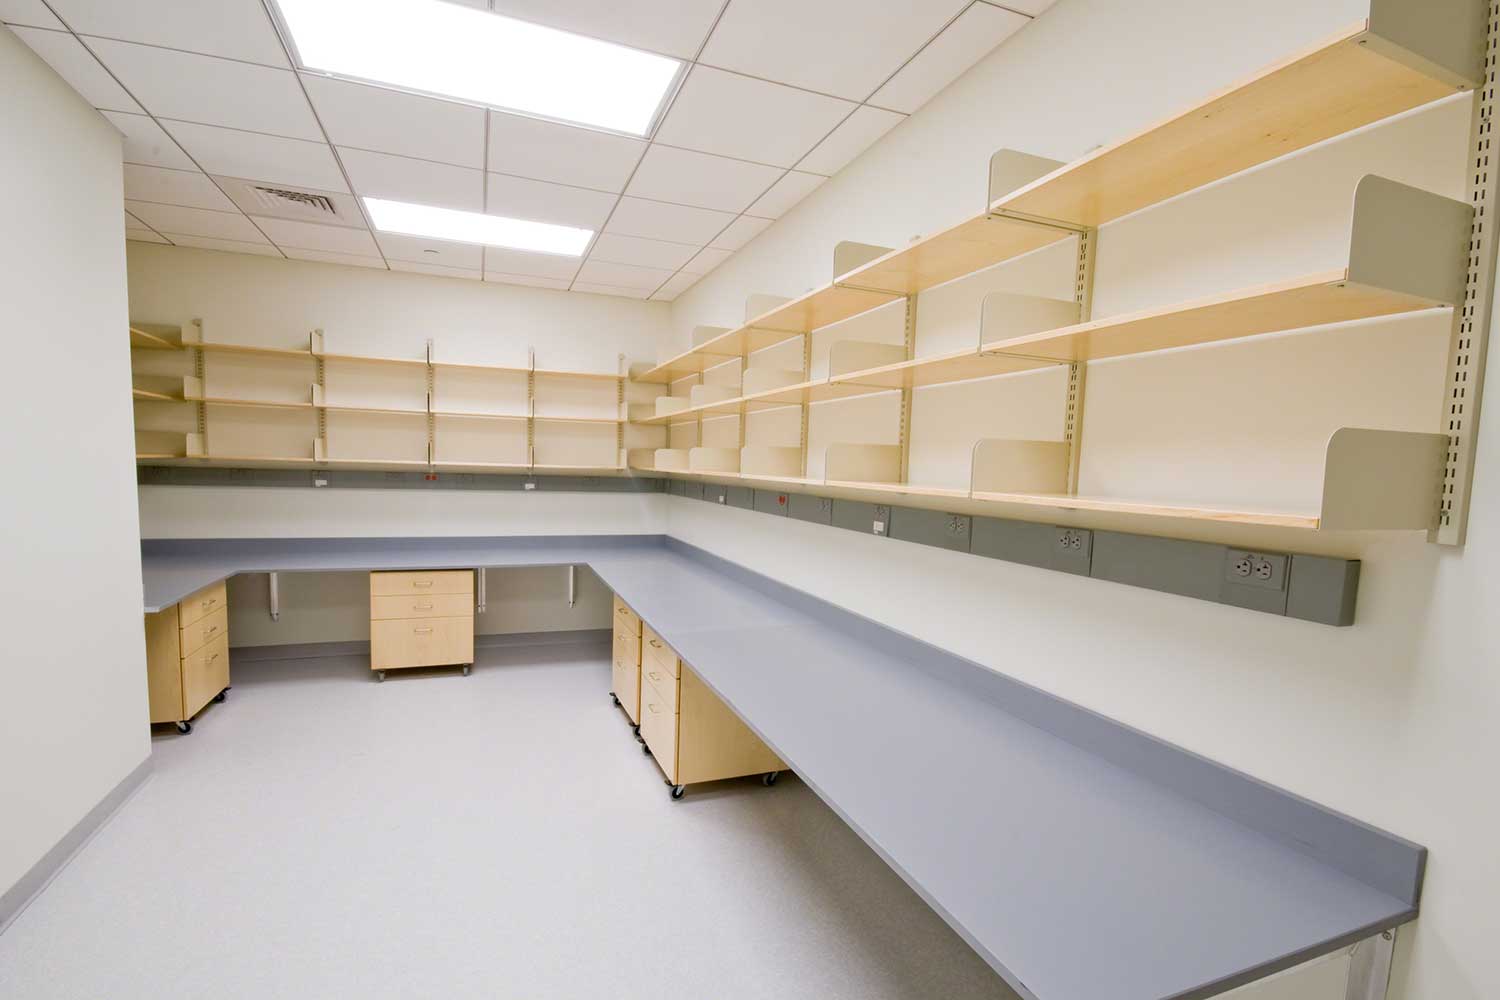 Commercial shelving manufacturer Commercial Casework and Cabinets